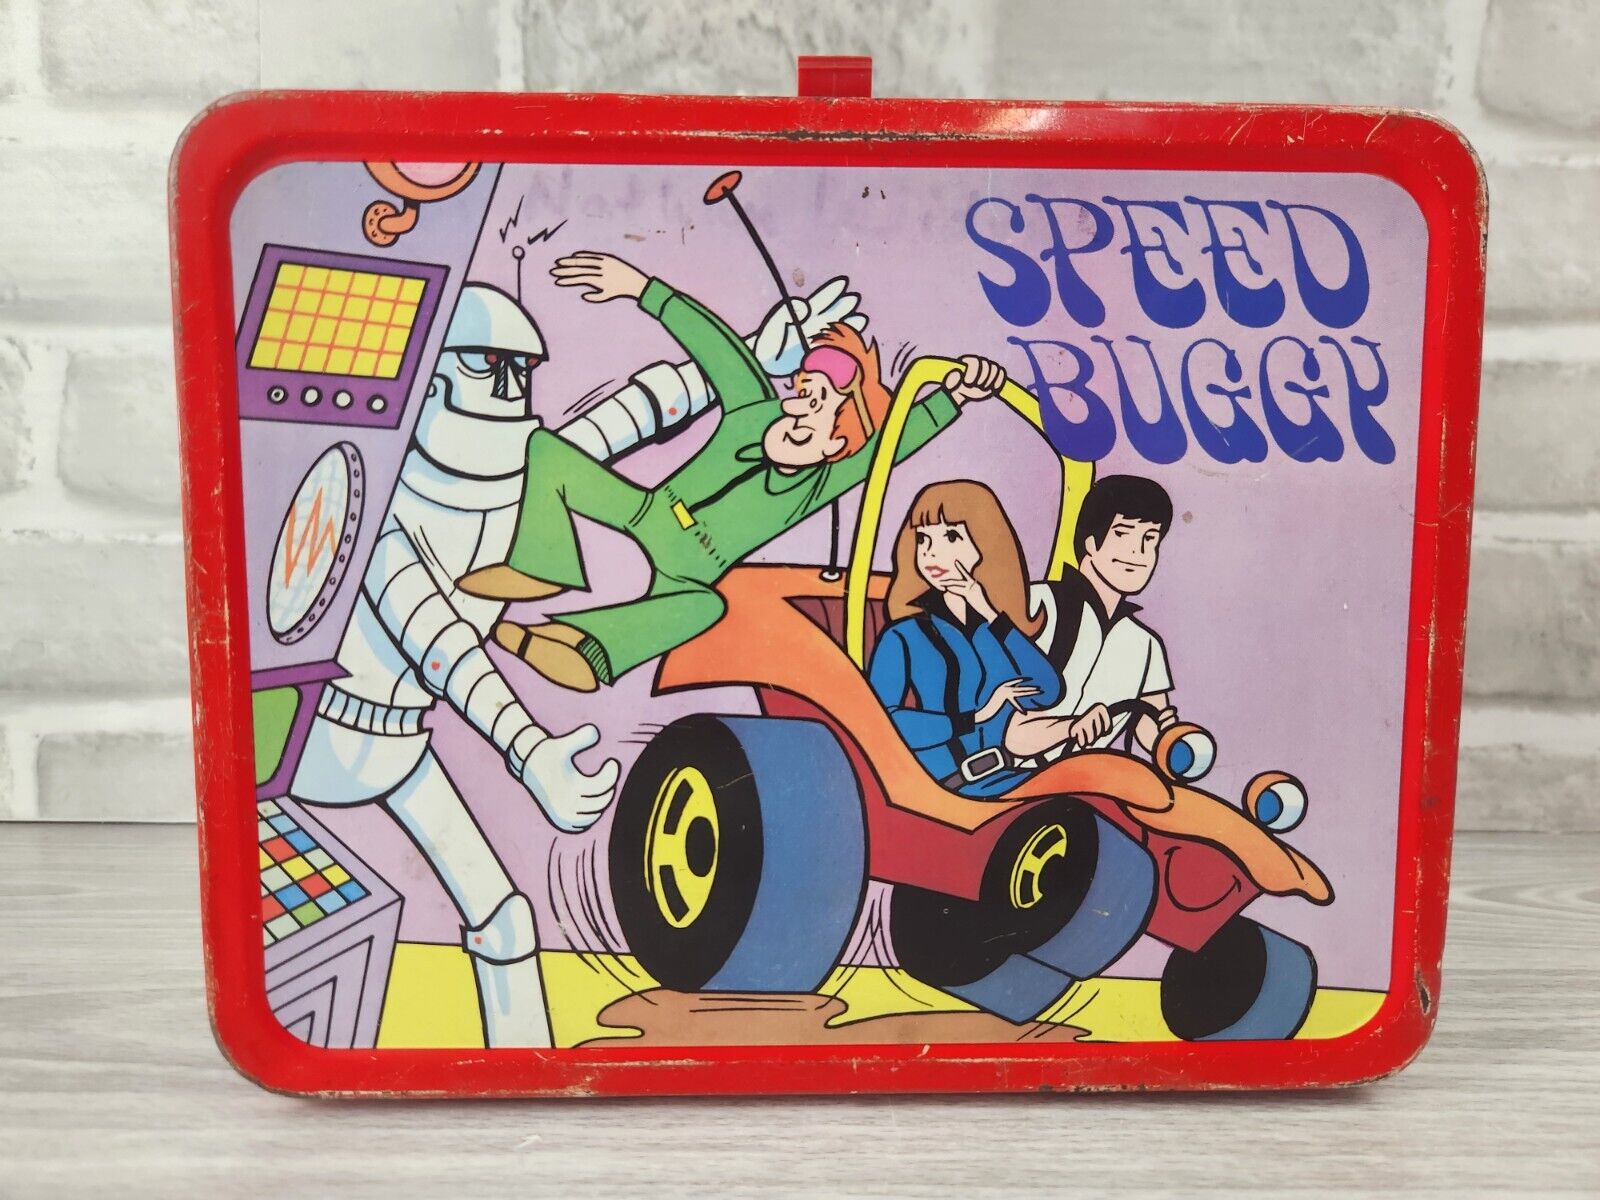 1973 Thermos Speed Buggy Metal Lunchbox Hanna Barbera no Thermos